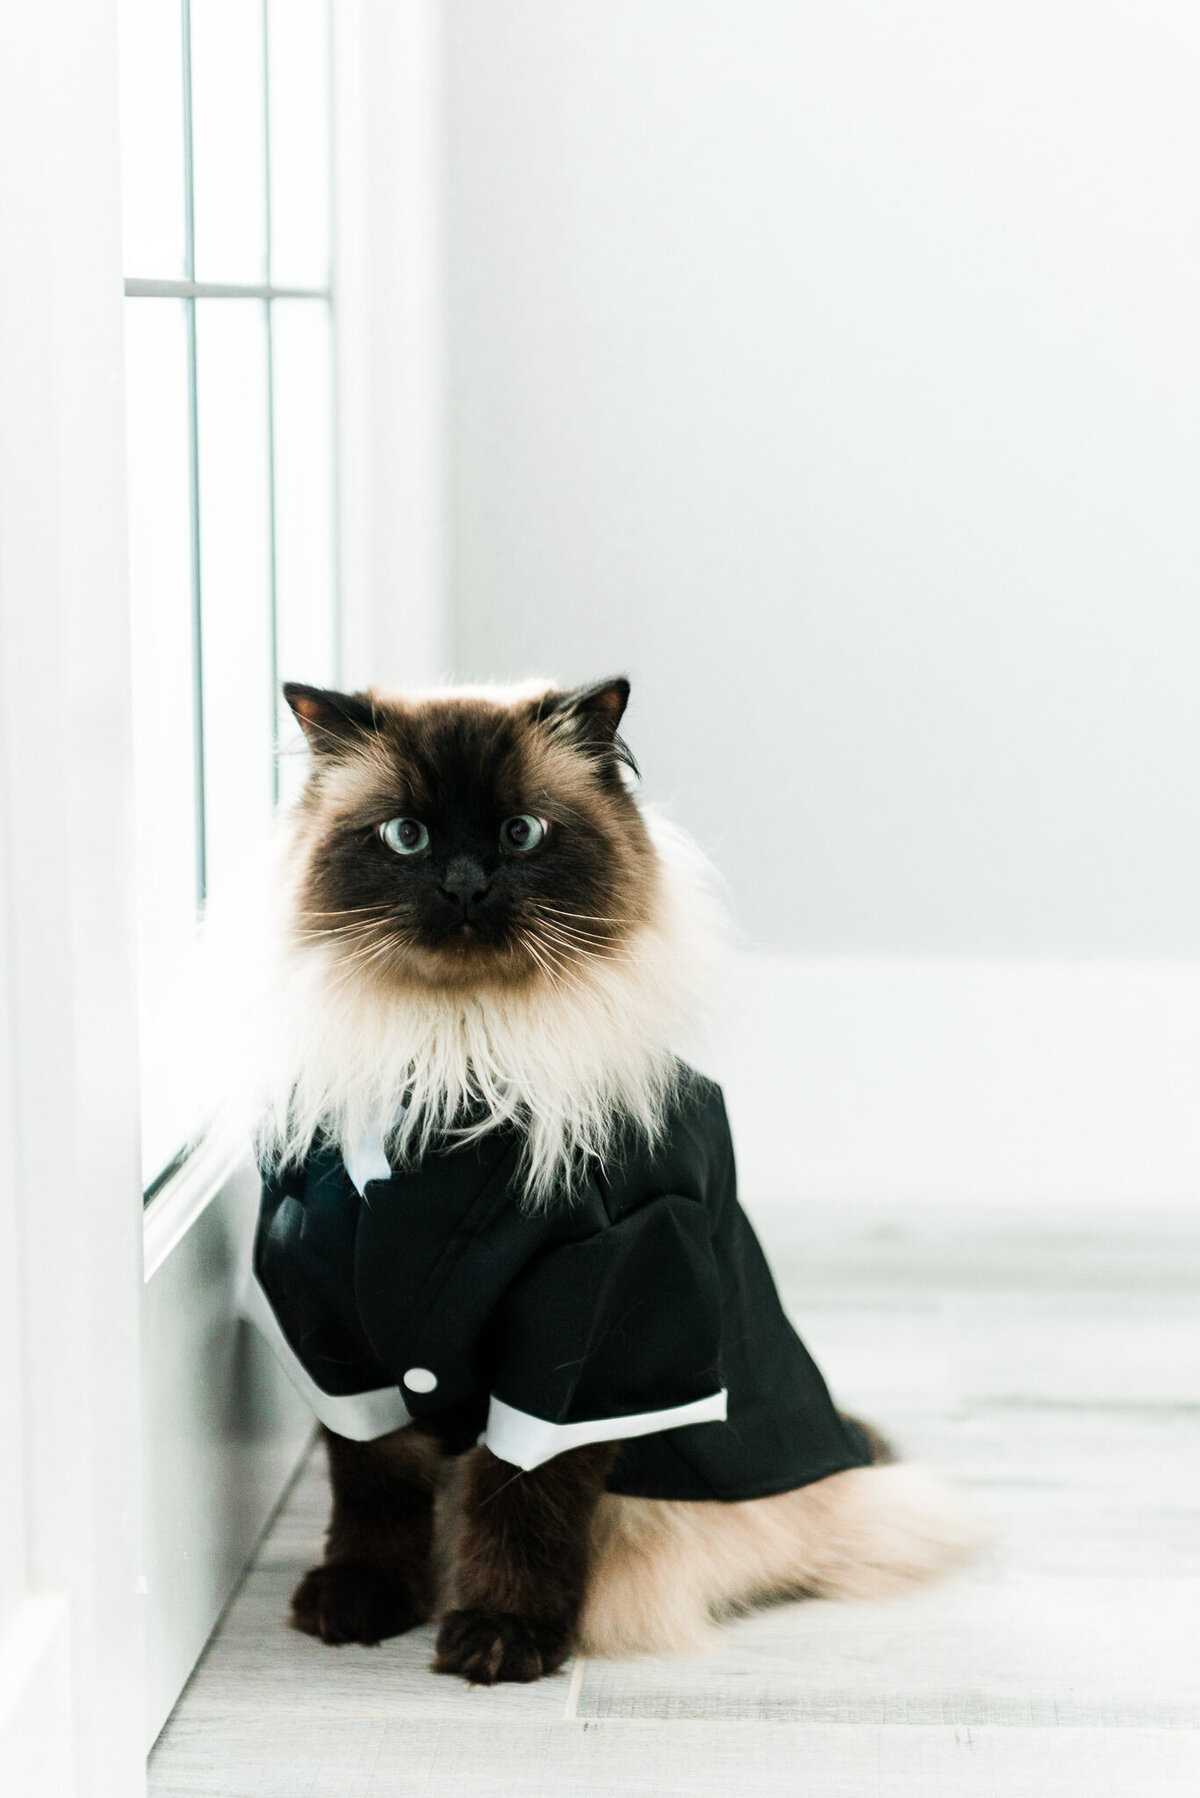 Cat dressed up for wedding